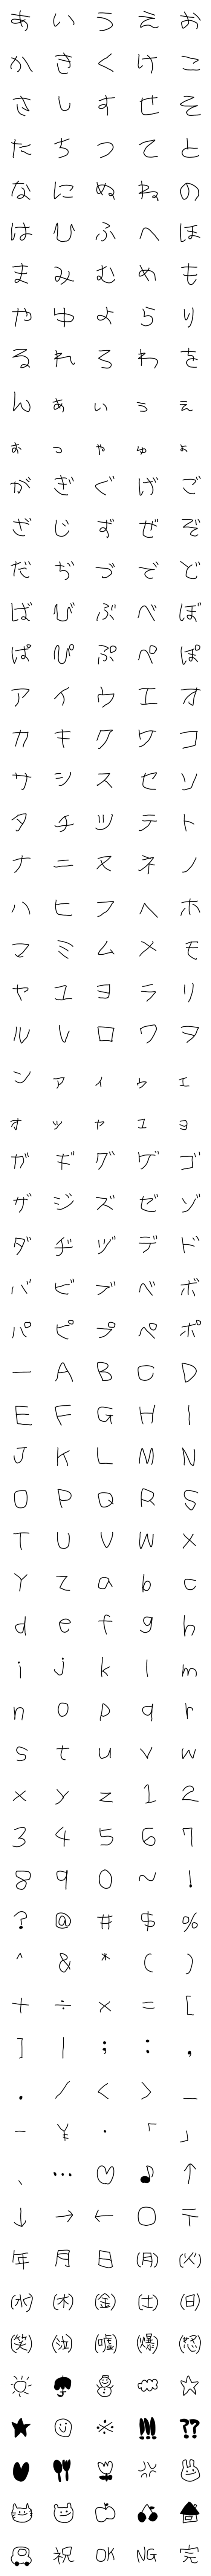 [LINE絵文字]左手書きデコ文字【汚文字】の画像一覧